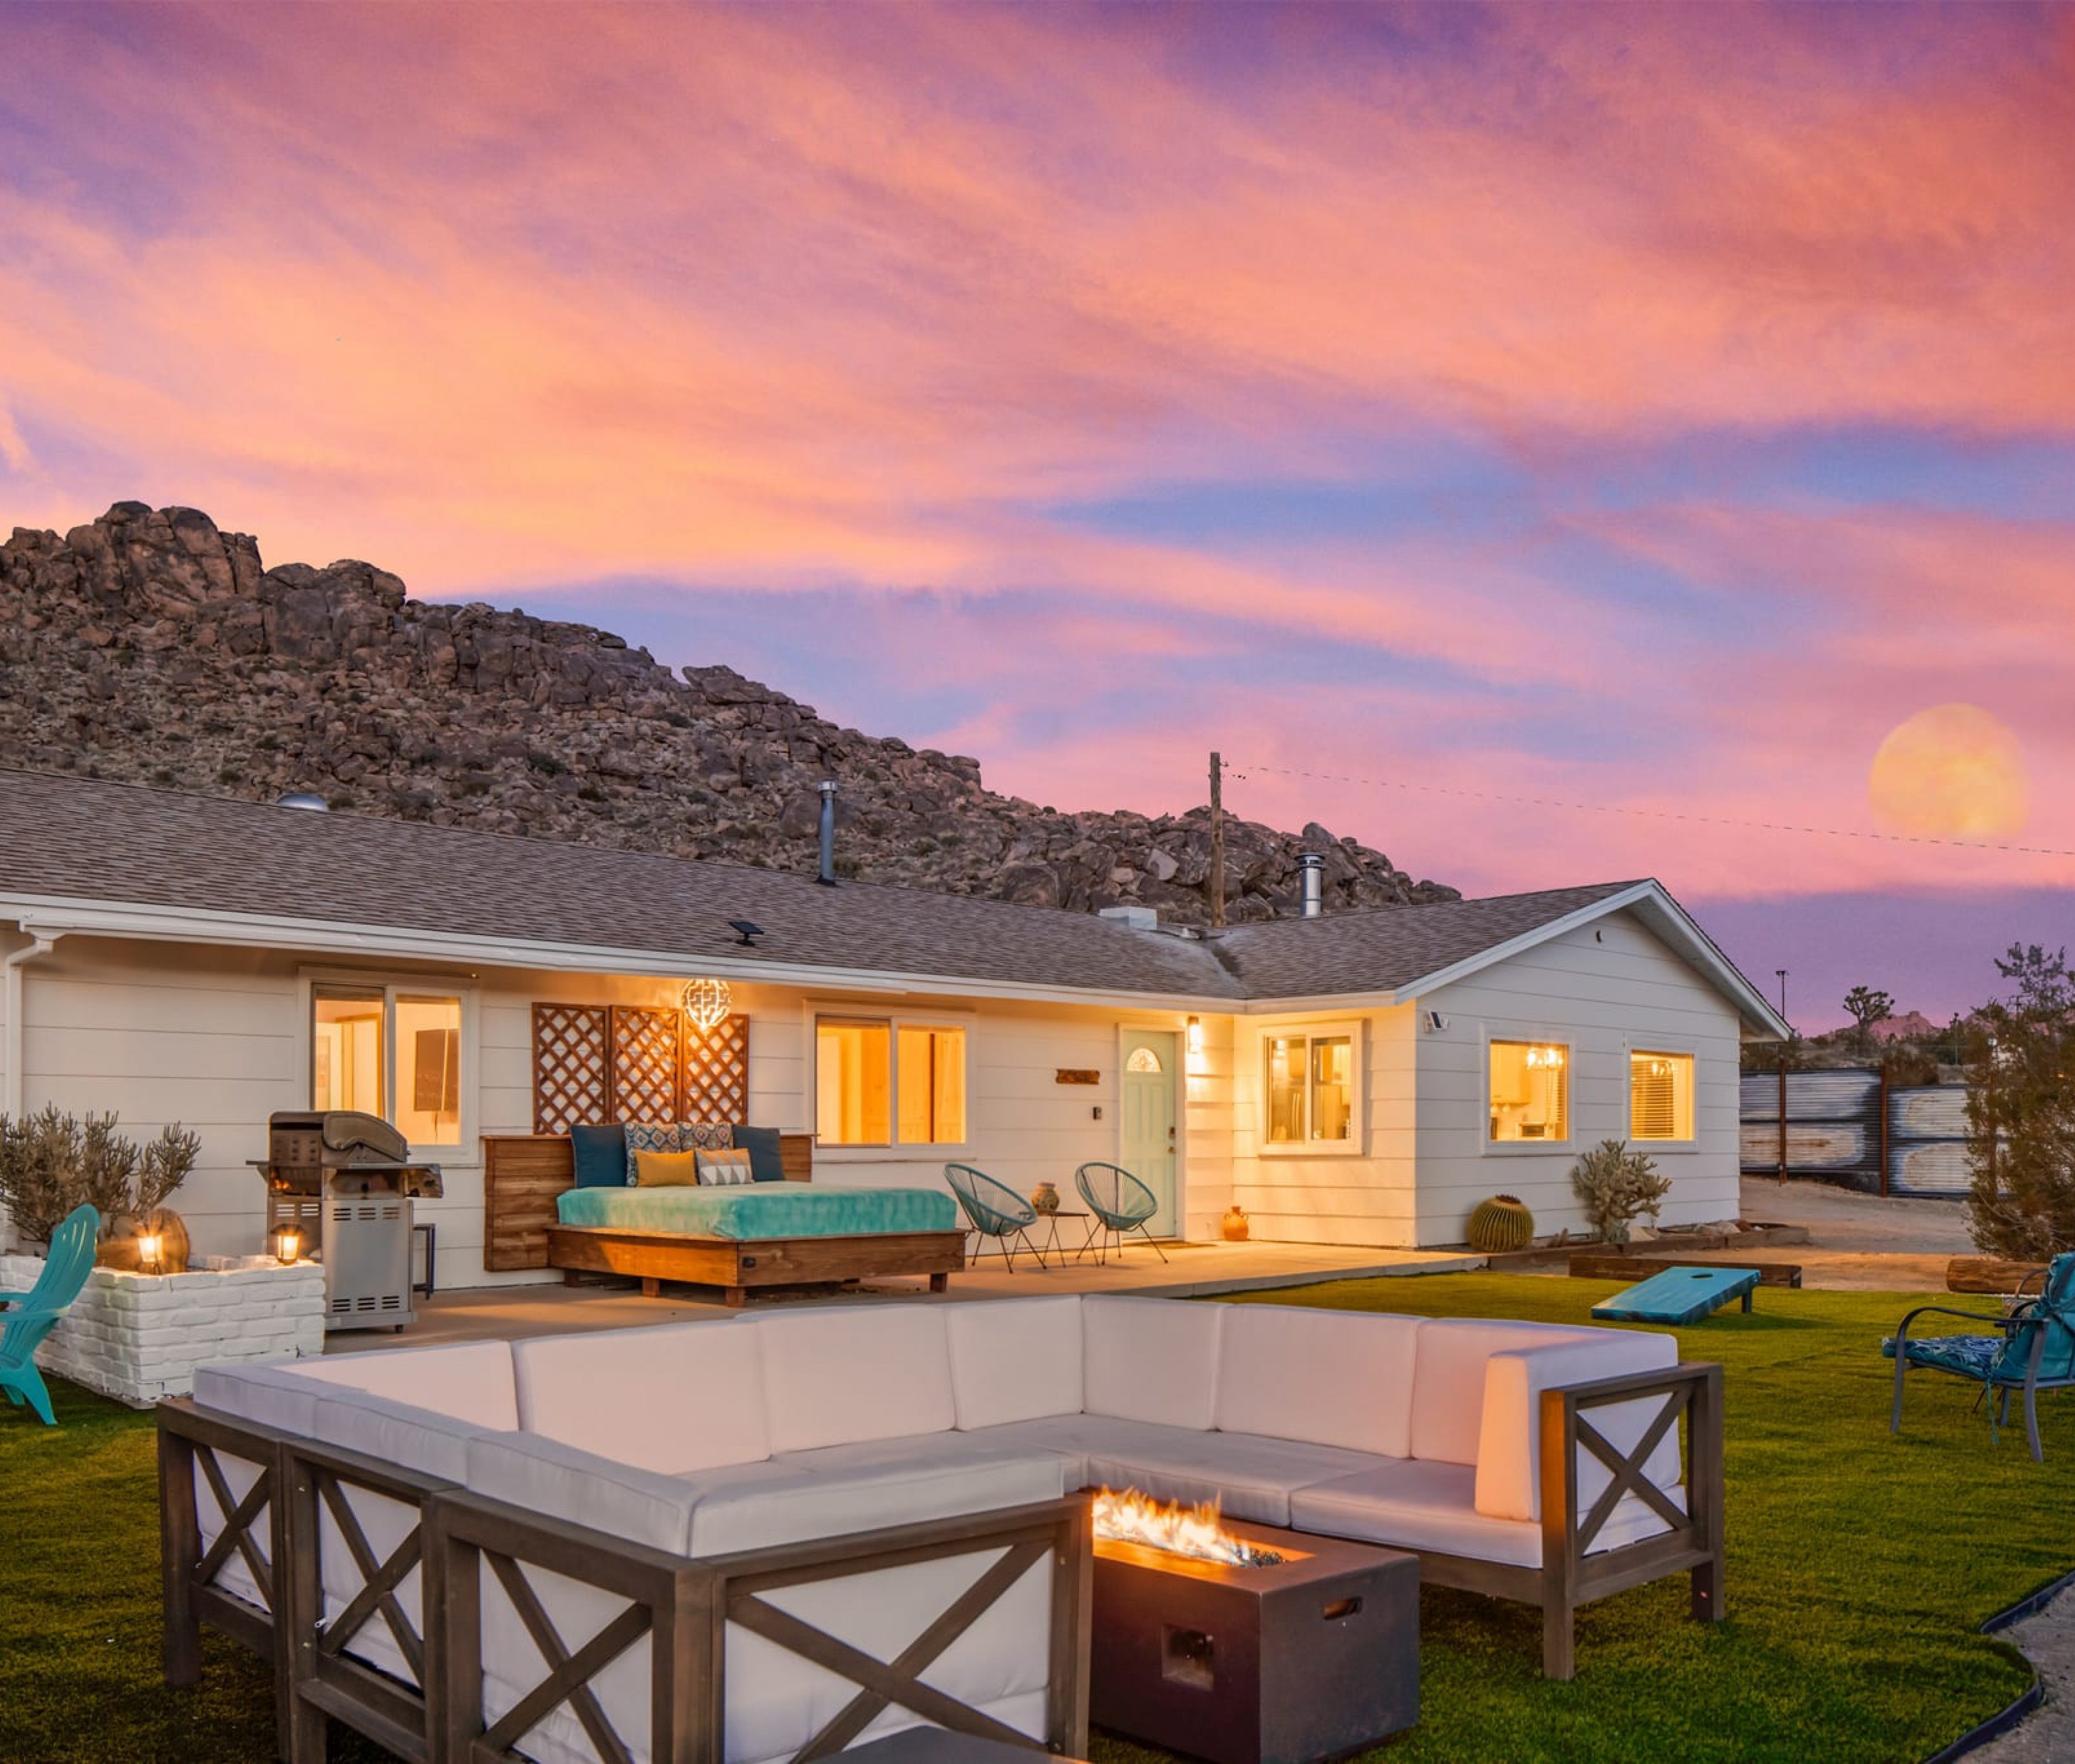 Joshua Tree 29 vacation rentals for large groups